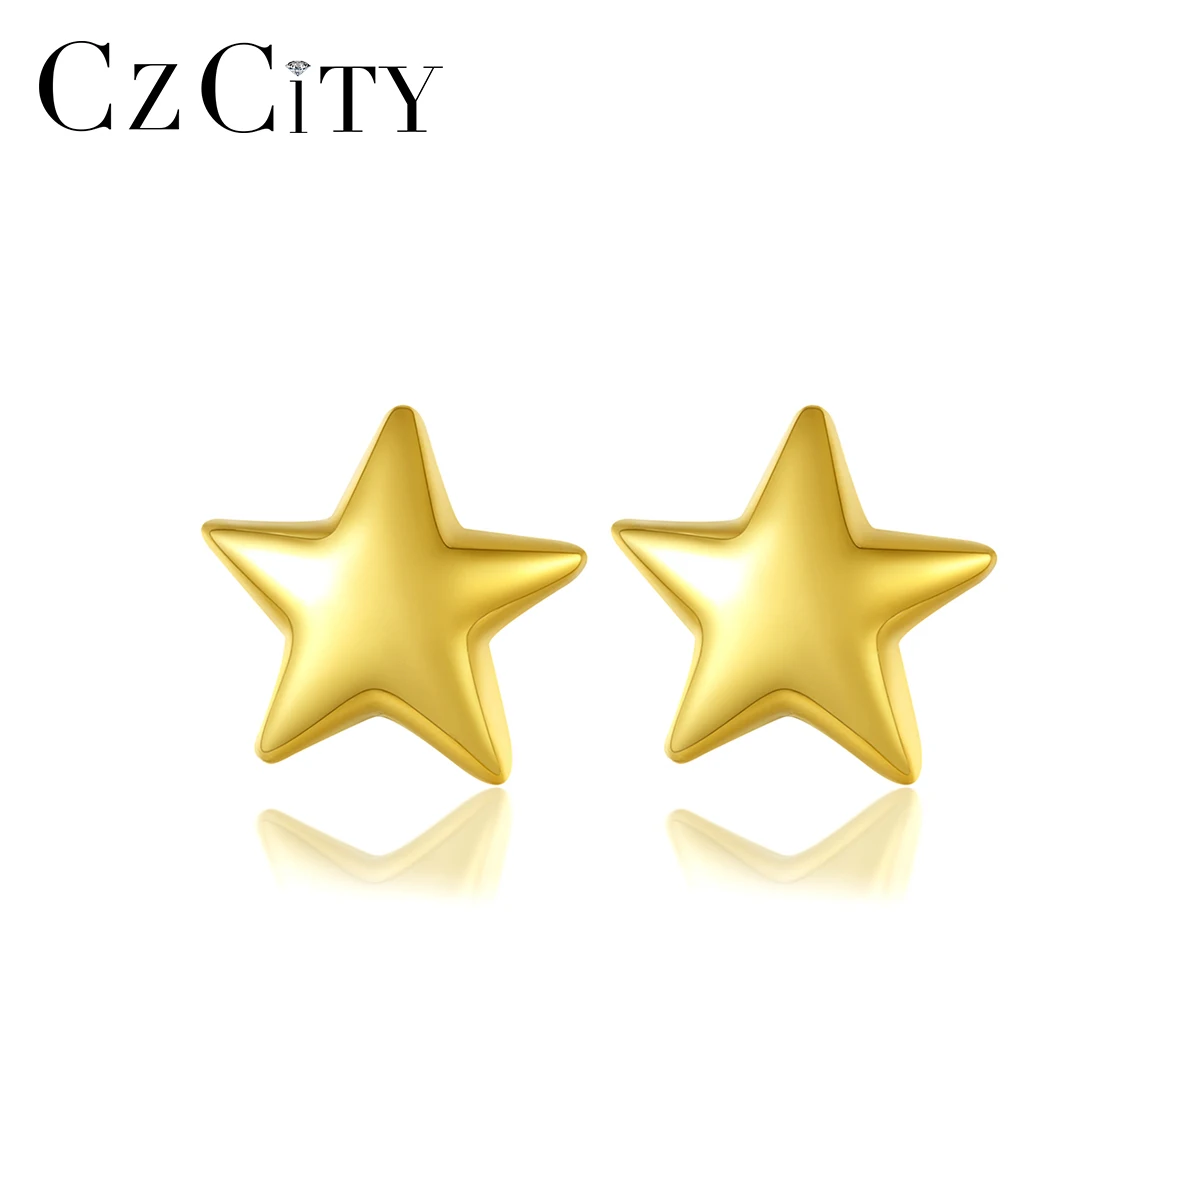 

CZCITY S925 Earring New Metal Ear Ring Popular Latest 2021 Fashion Silver Stud Earing for Man